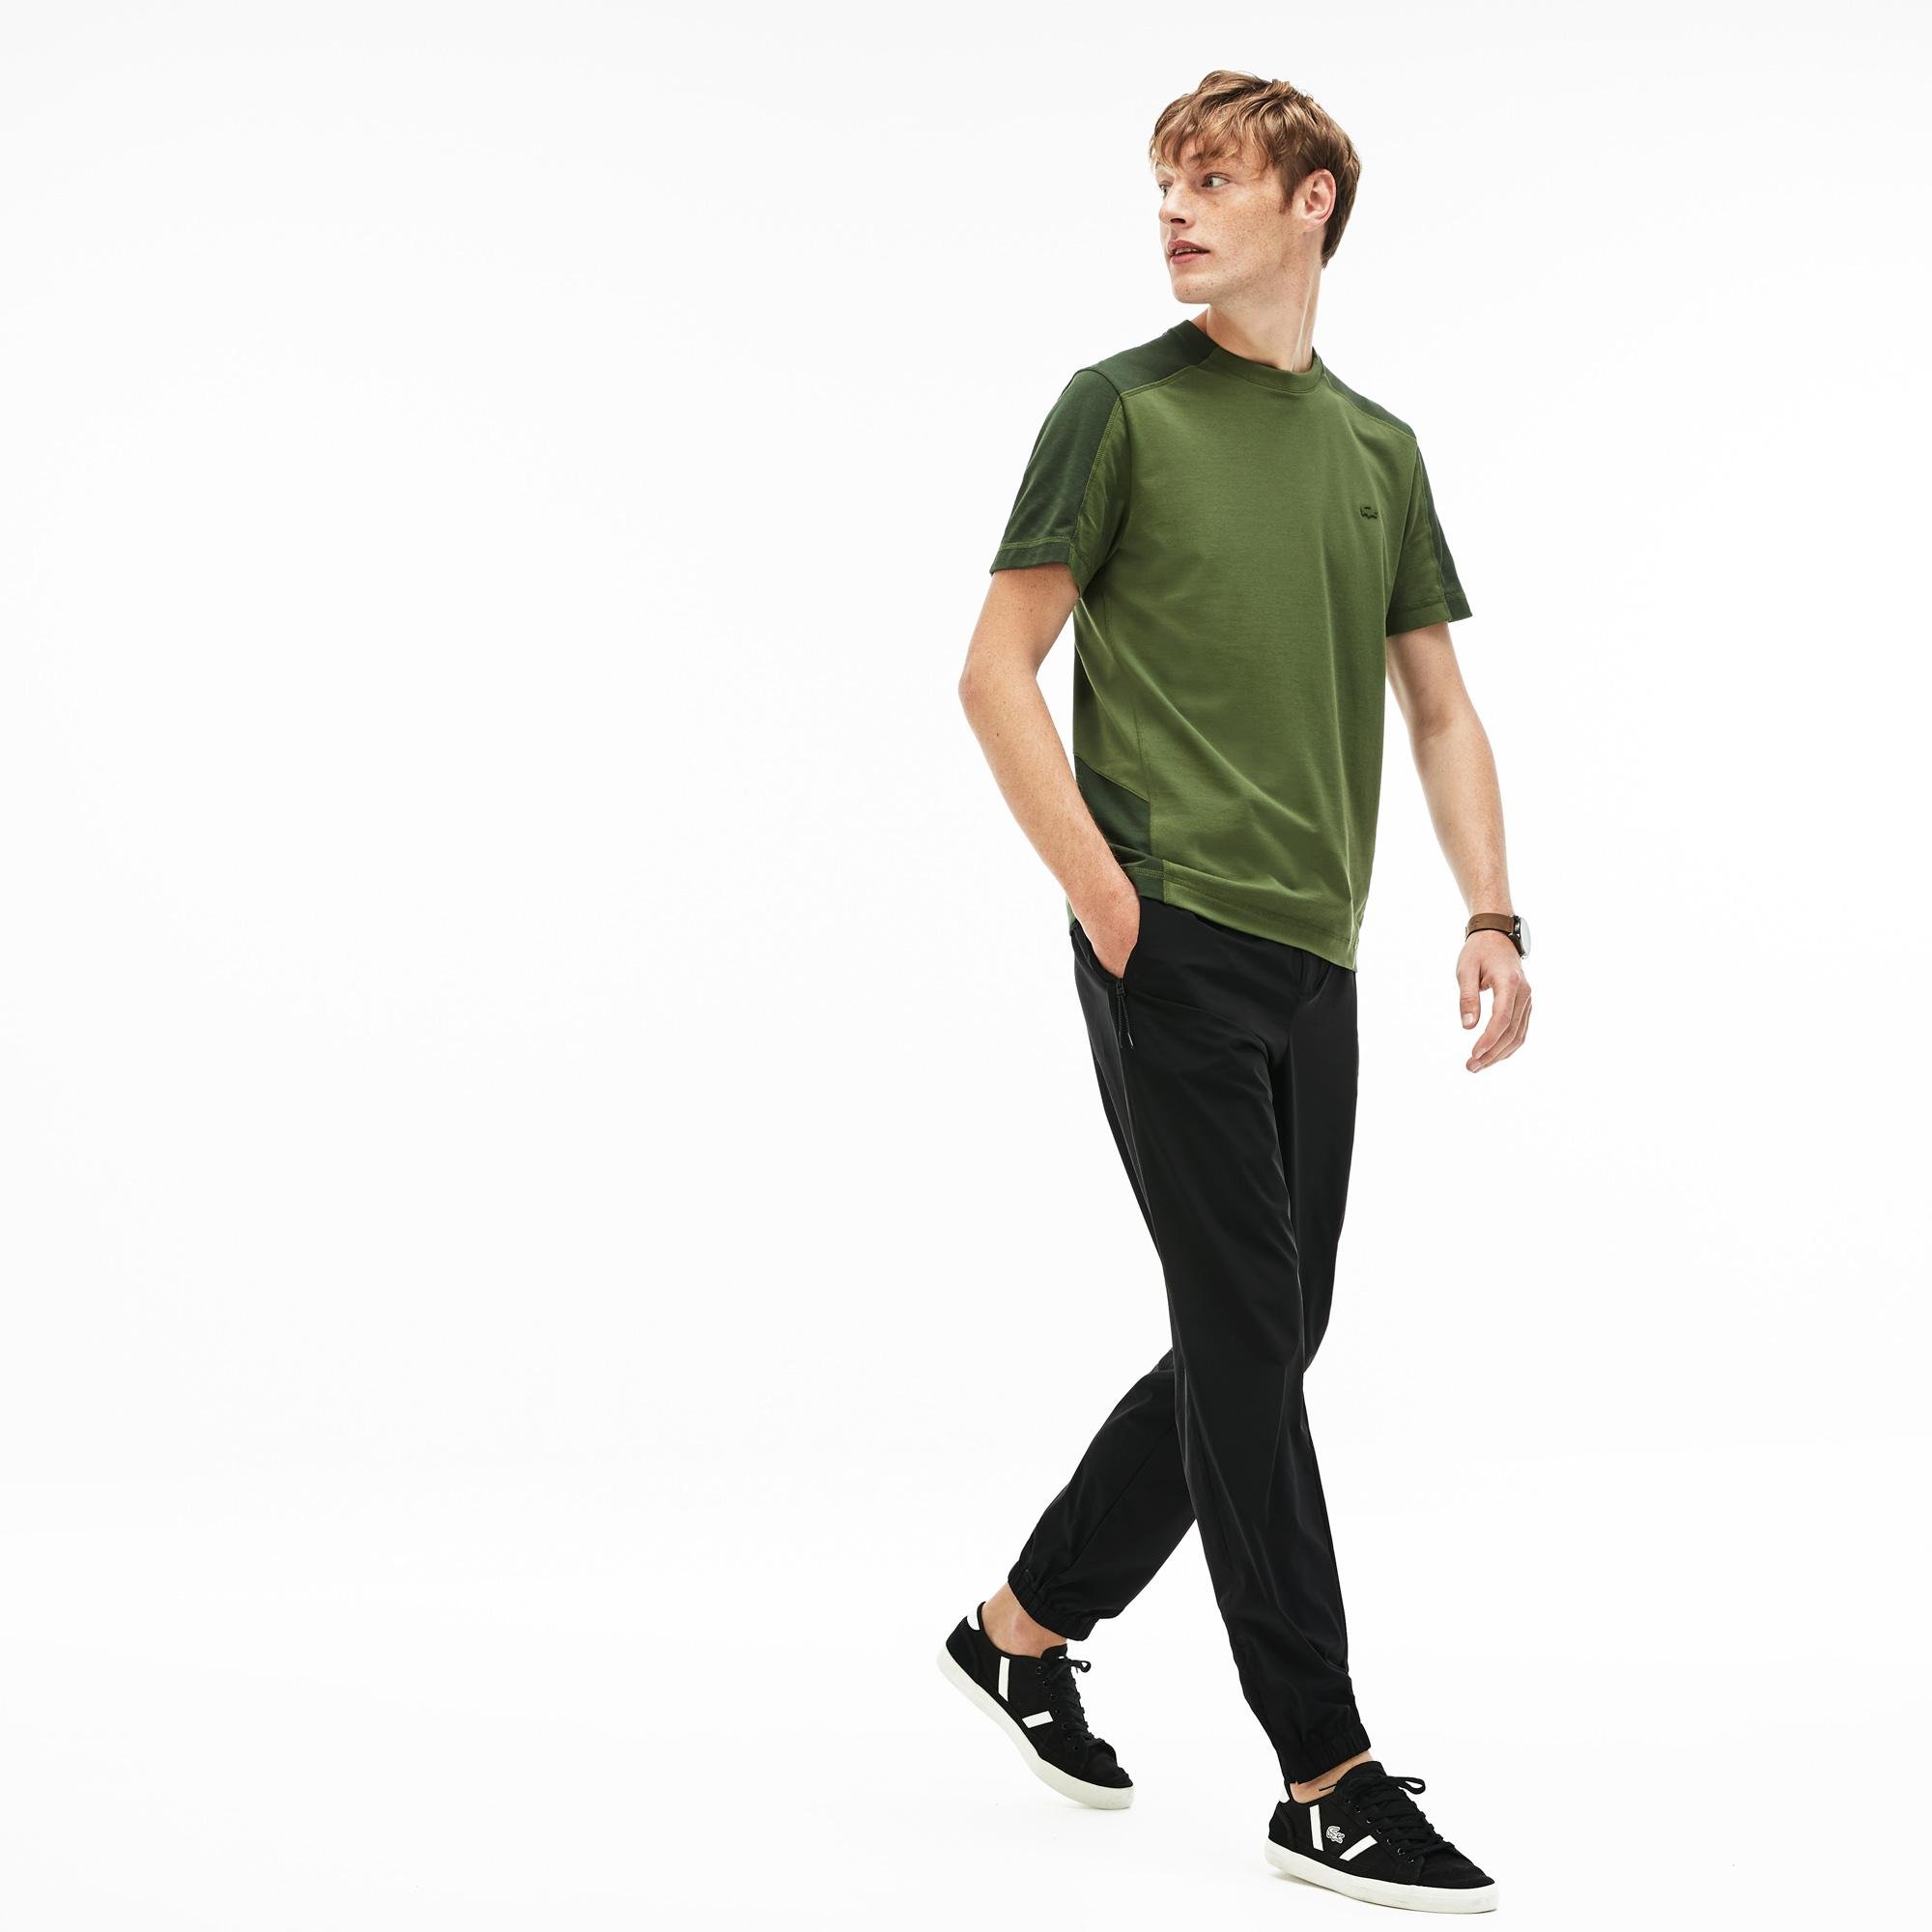 Lacoste Men's Motion Relaxed Fit Water-Resistant Chino Pants